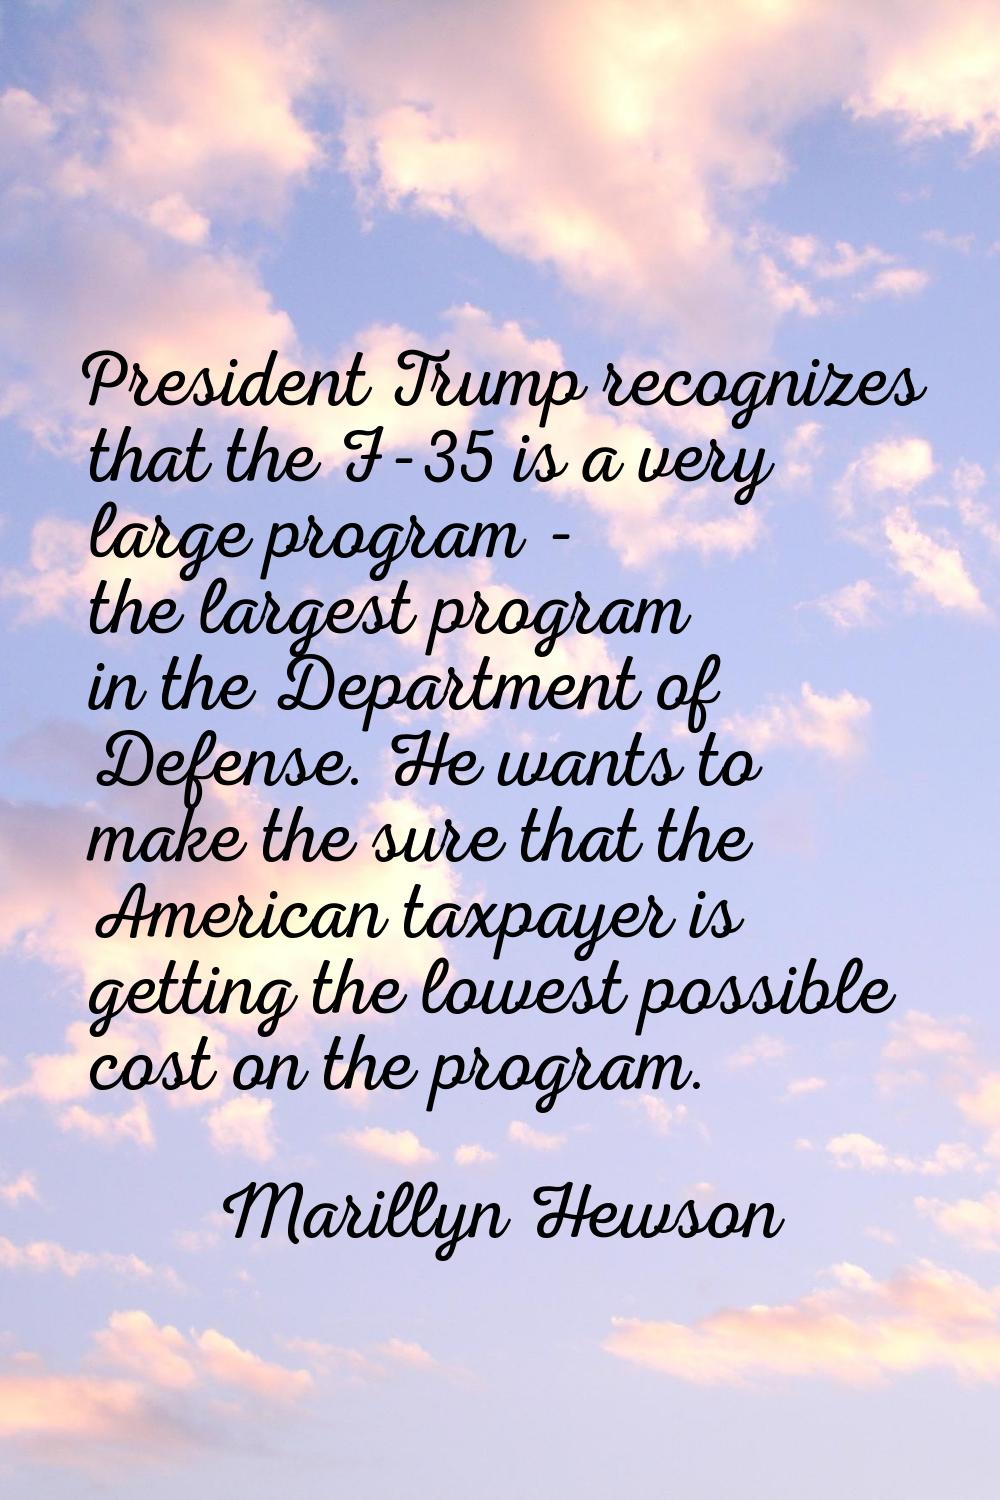 President Trump recognizes that the F-35 is a very large program - the largest program in the Depar